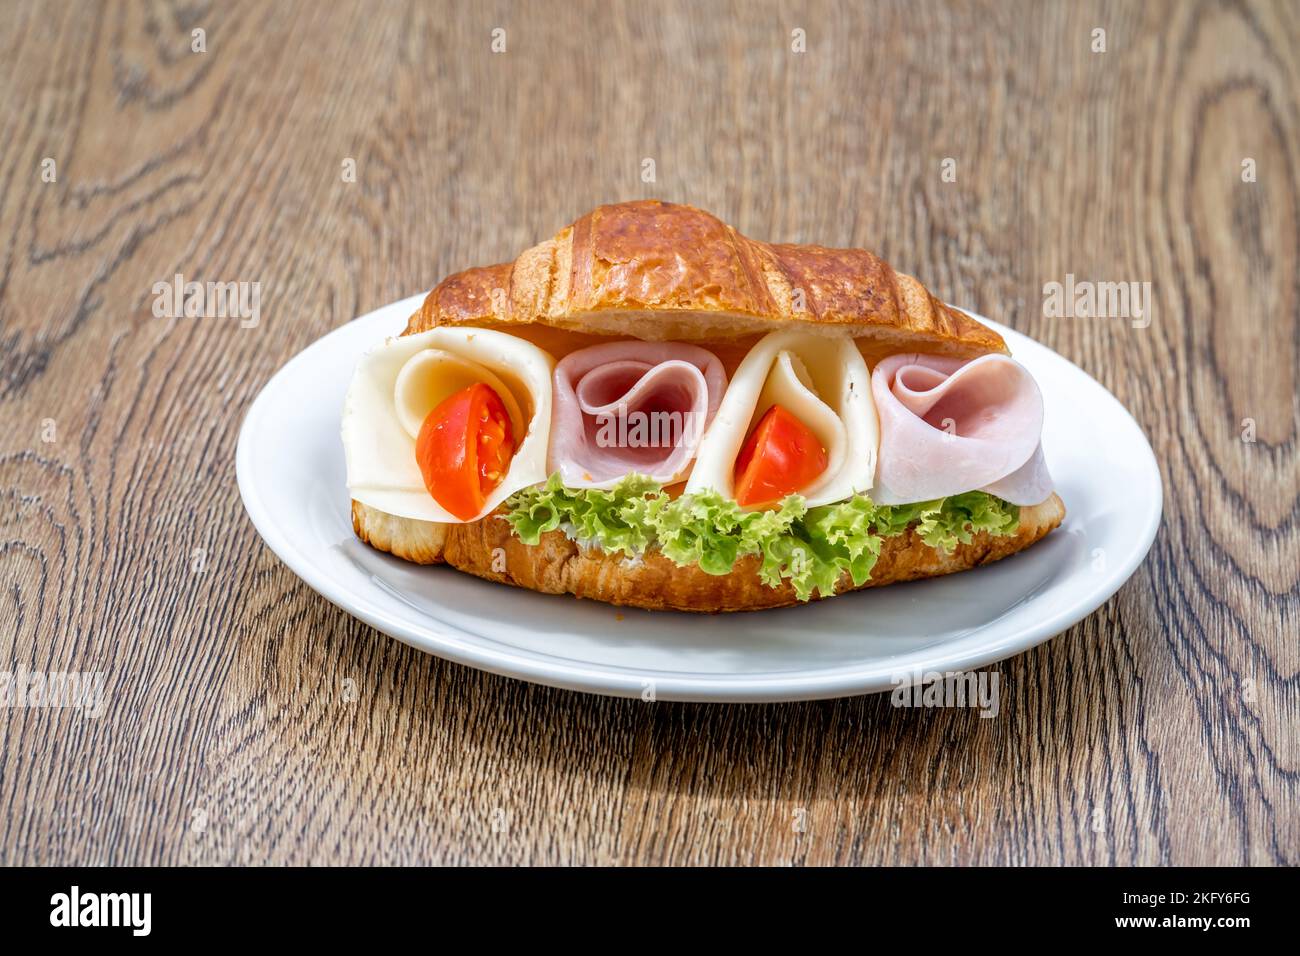 Croissant filled with ham, cheese and vegetables Stock Photo